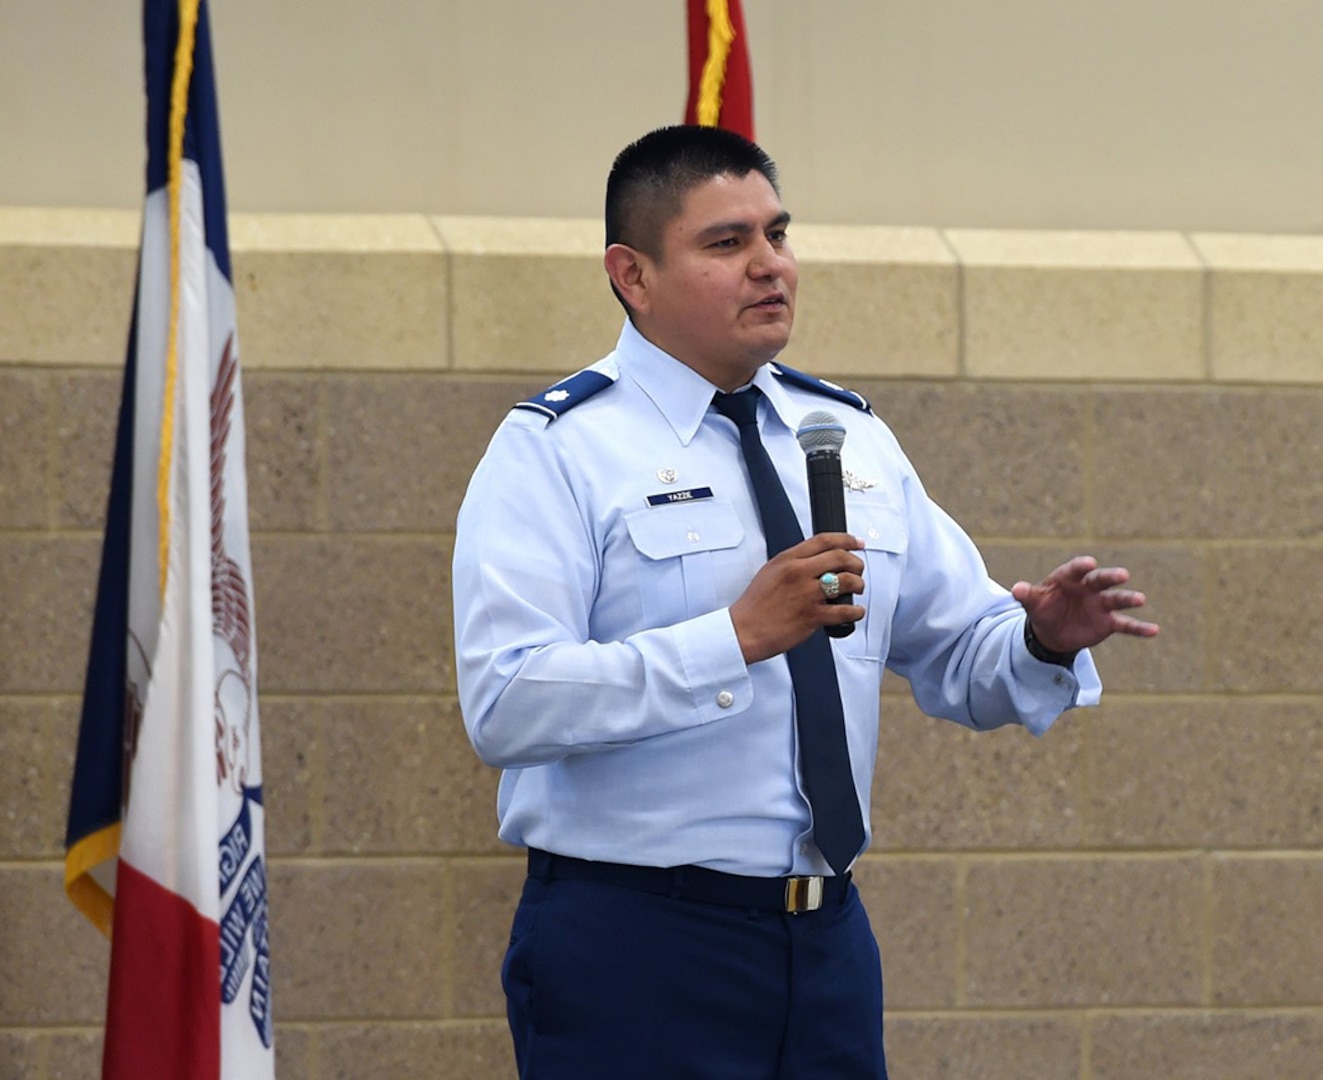 Col. Lawrence Yazzie, the new director of the National Guard Bureau's Office of Diversity, Equity and Inclusion, addresses a crowd at a symposium in Iowa in 2018. Yazzie grew up on a Navajo reservation in Arizona, played basketball at the Air Force Academy and commanded the Iowa Air Guard’s 168th Cyberspace Squadron.